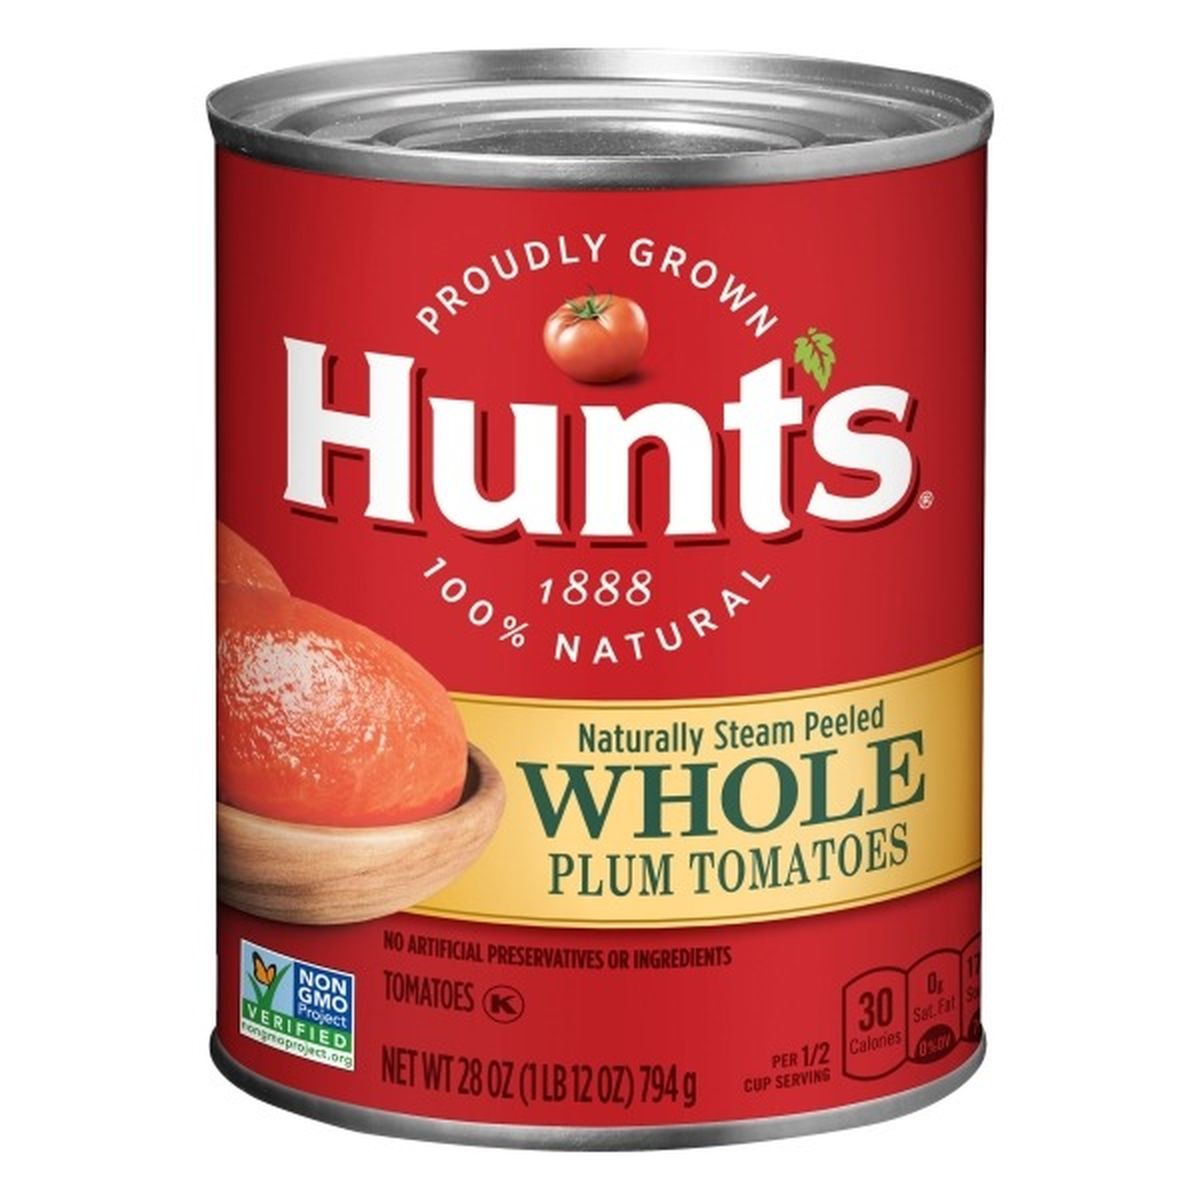 Calories in Hunt's Tomatoes, Plum, Whole